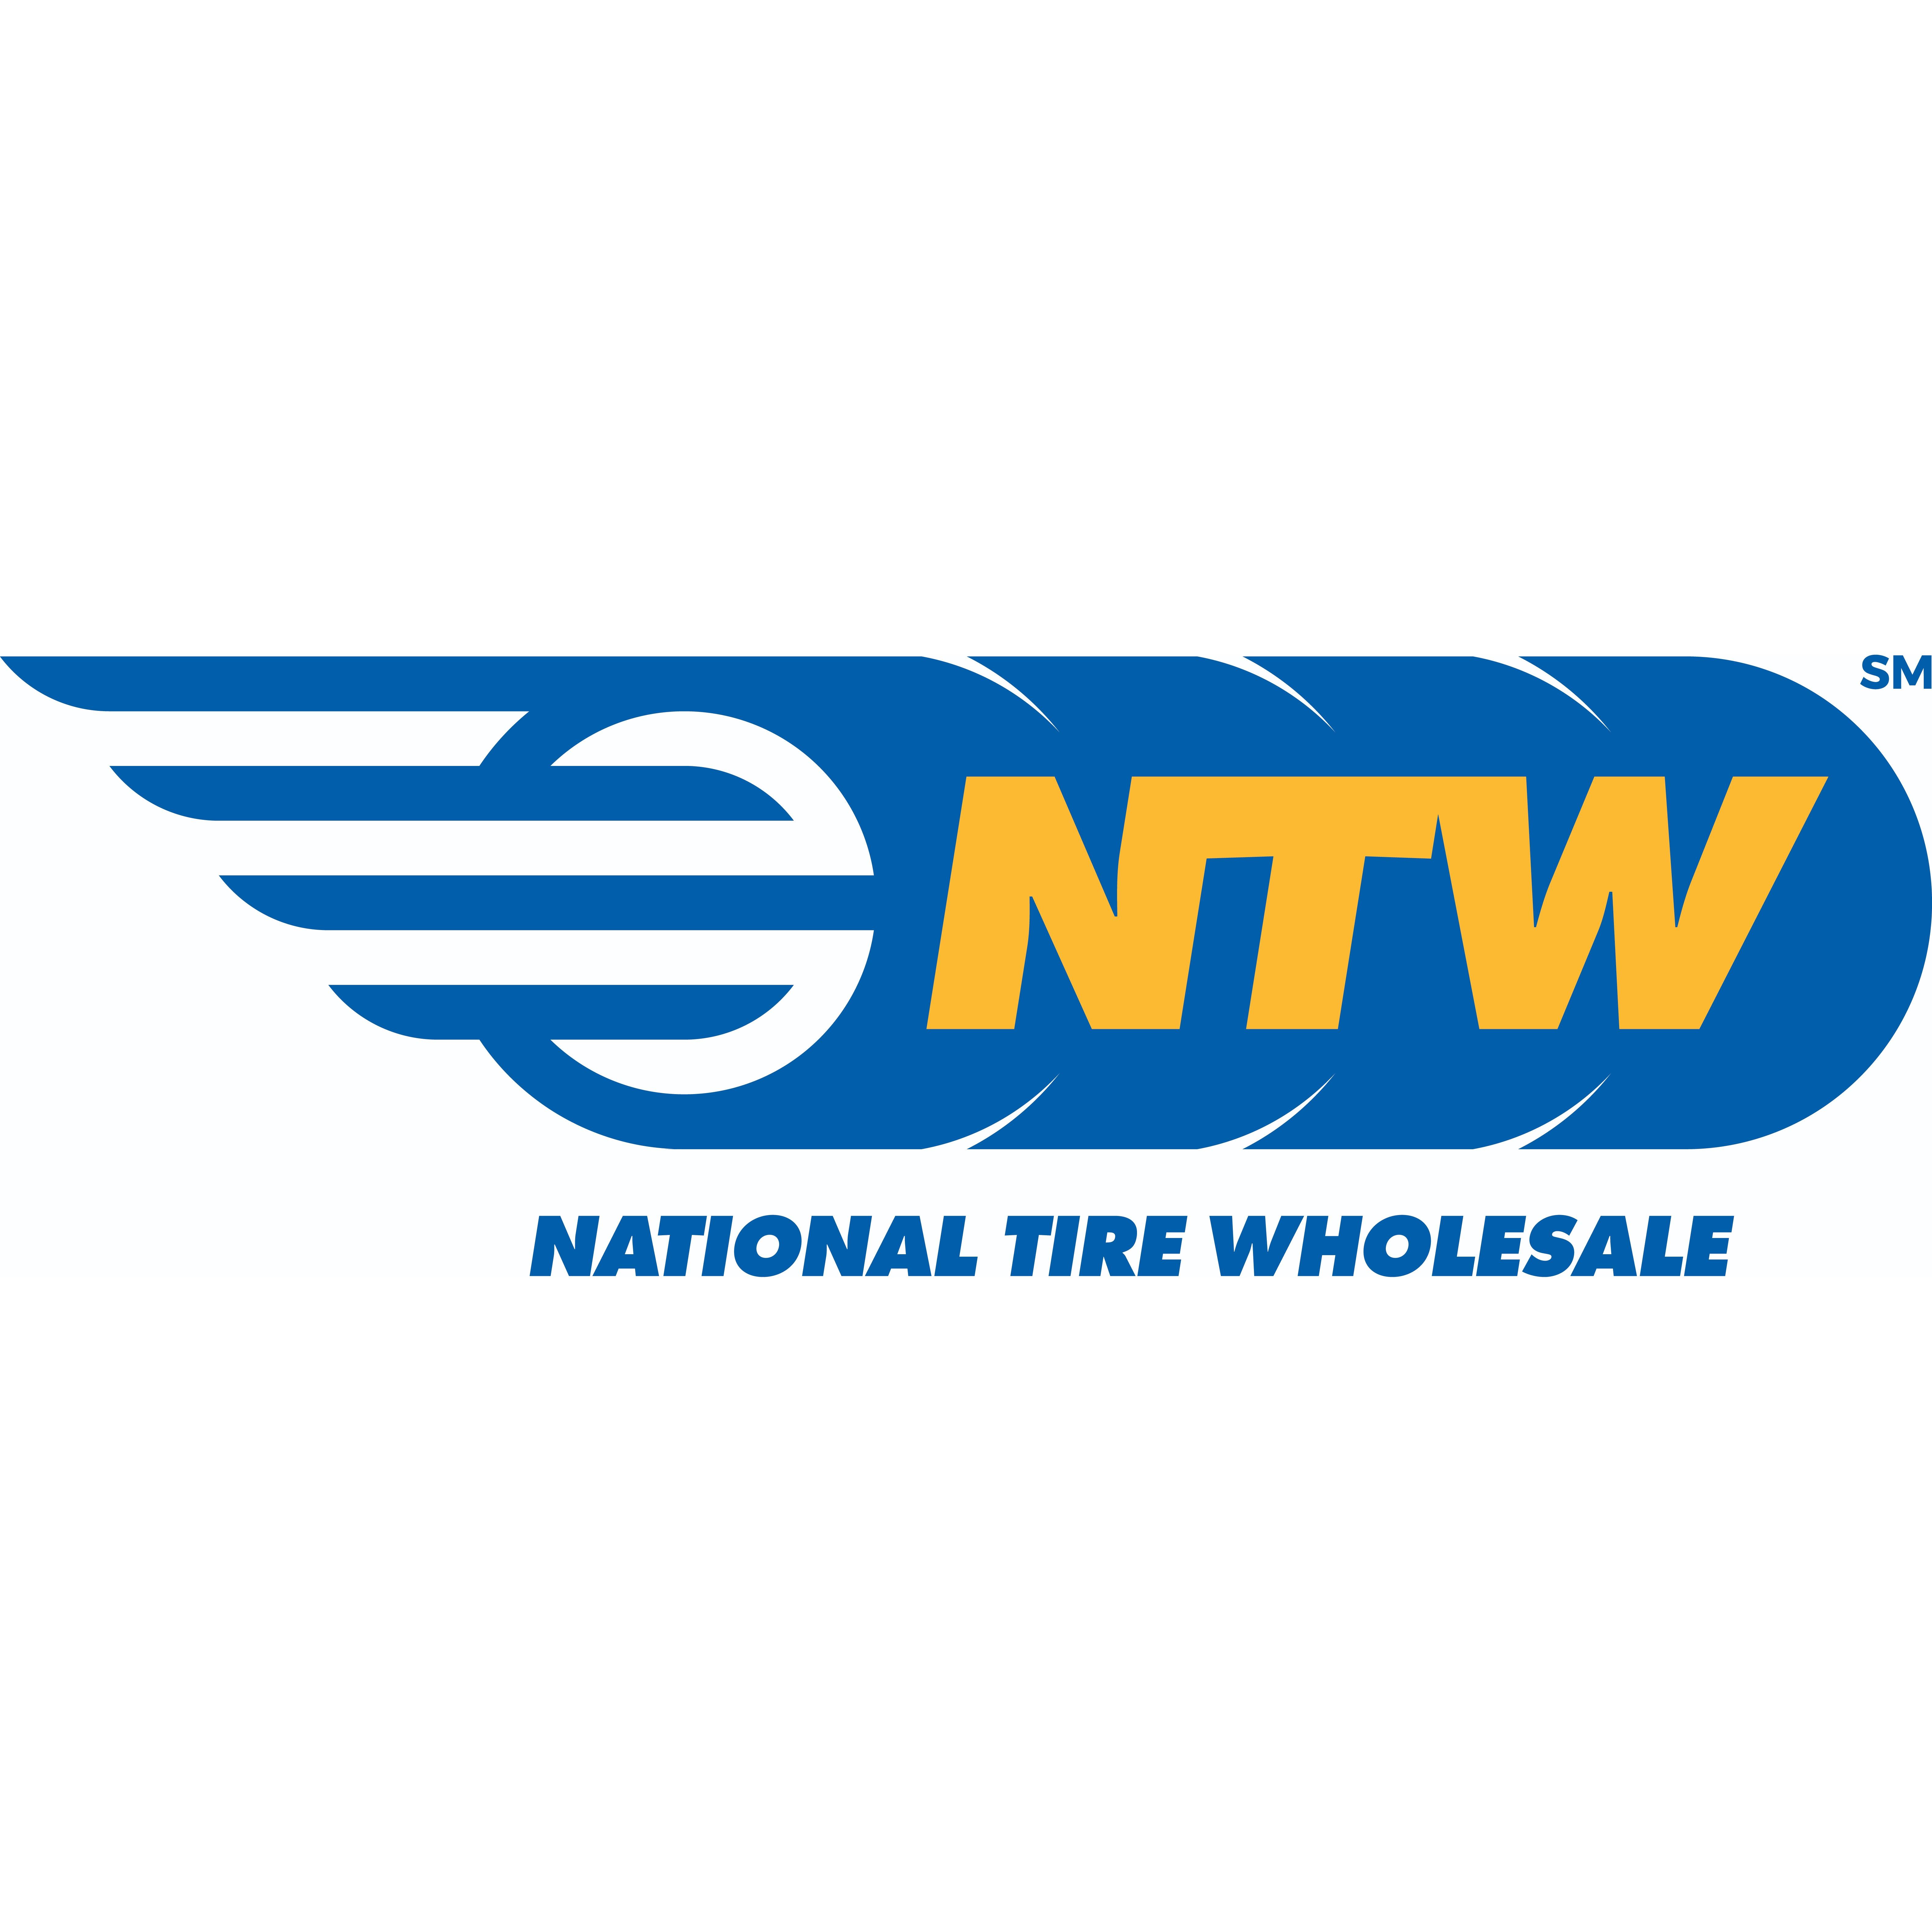 NTW - National Tire Wholesale - New Berlin, WI 53151 - (262)641-4116 | ShowMeLocal.com